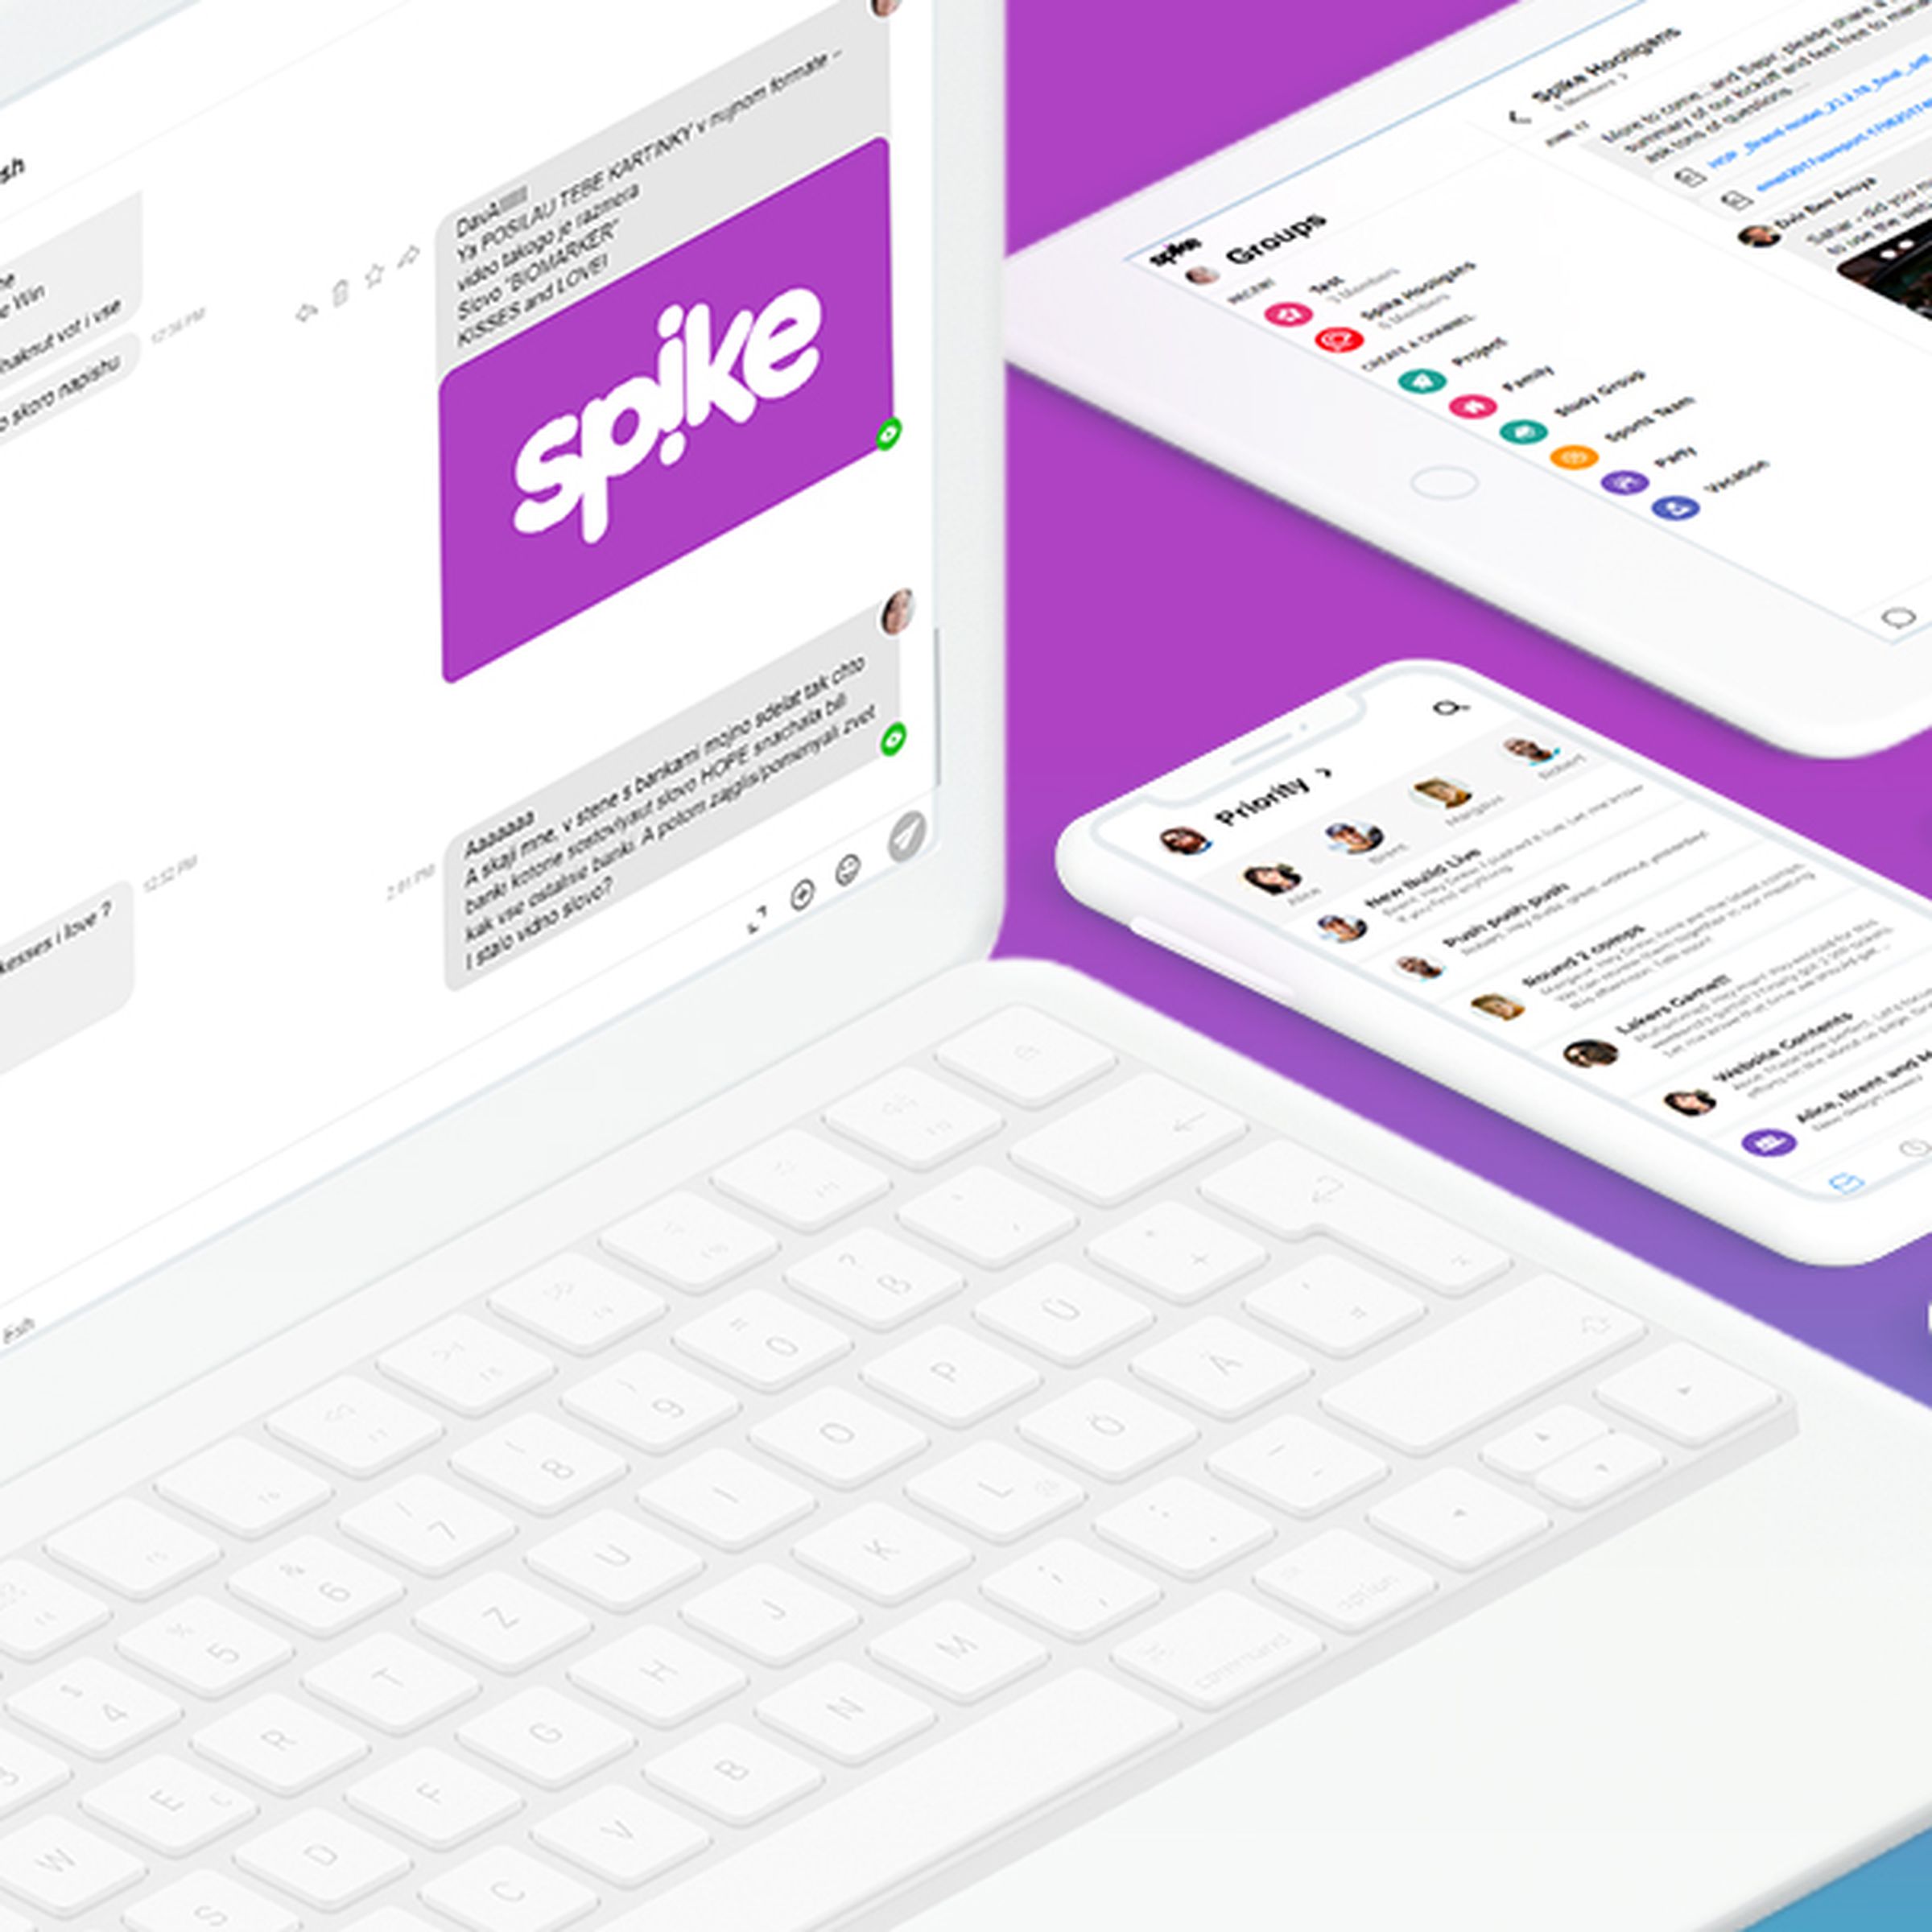 Spike email